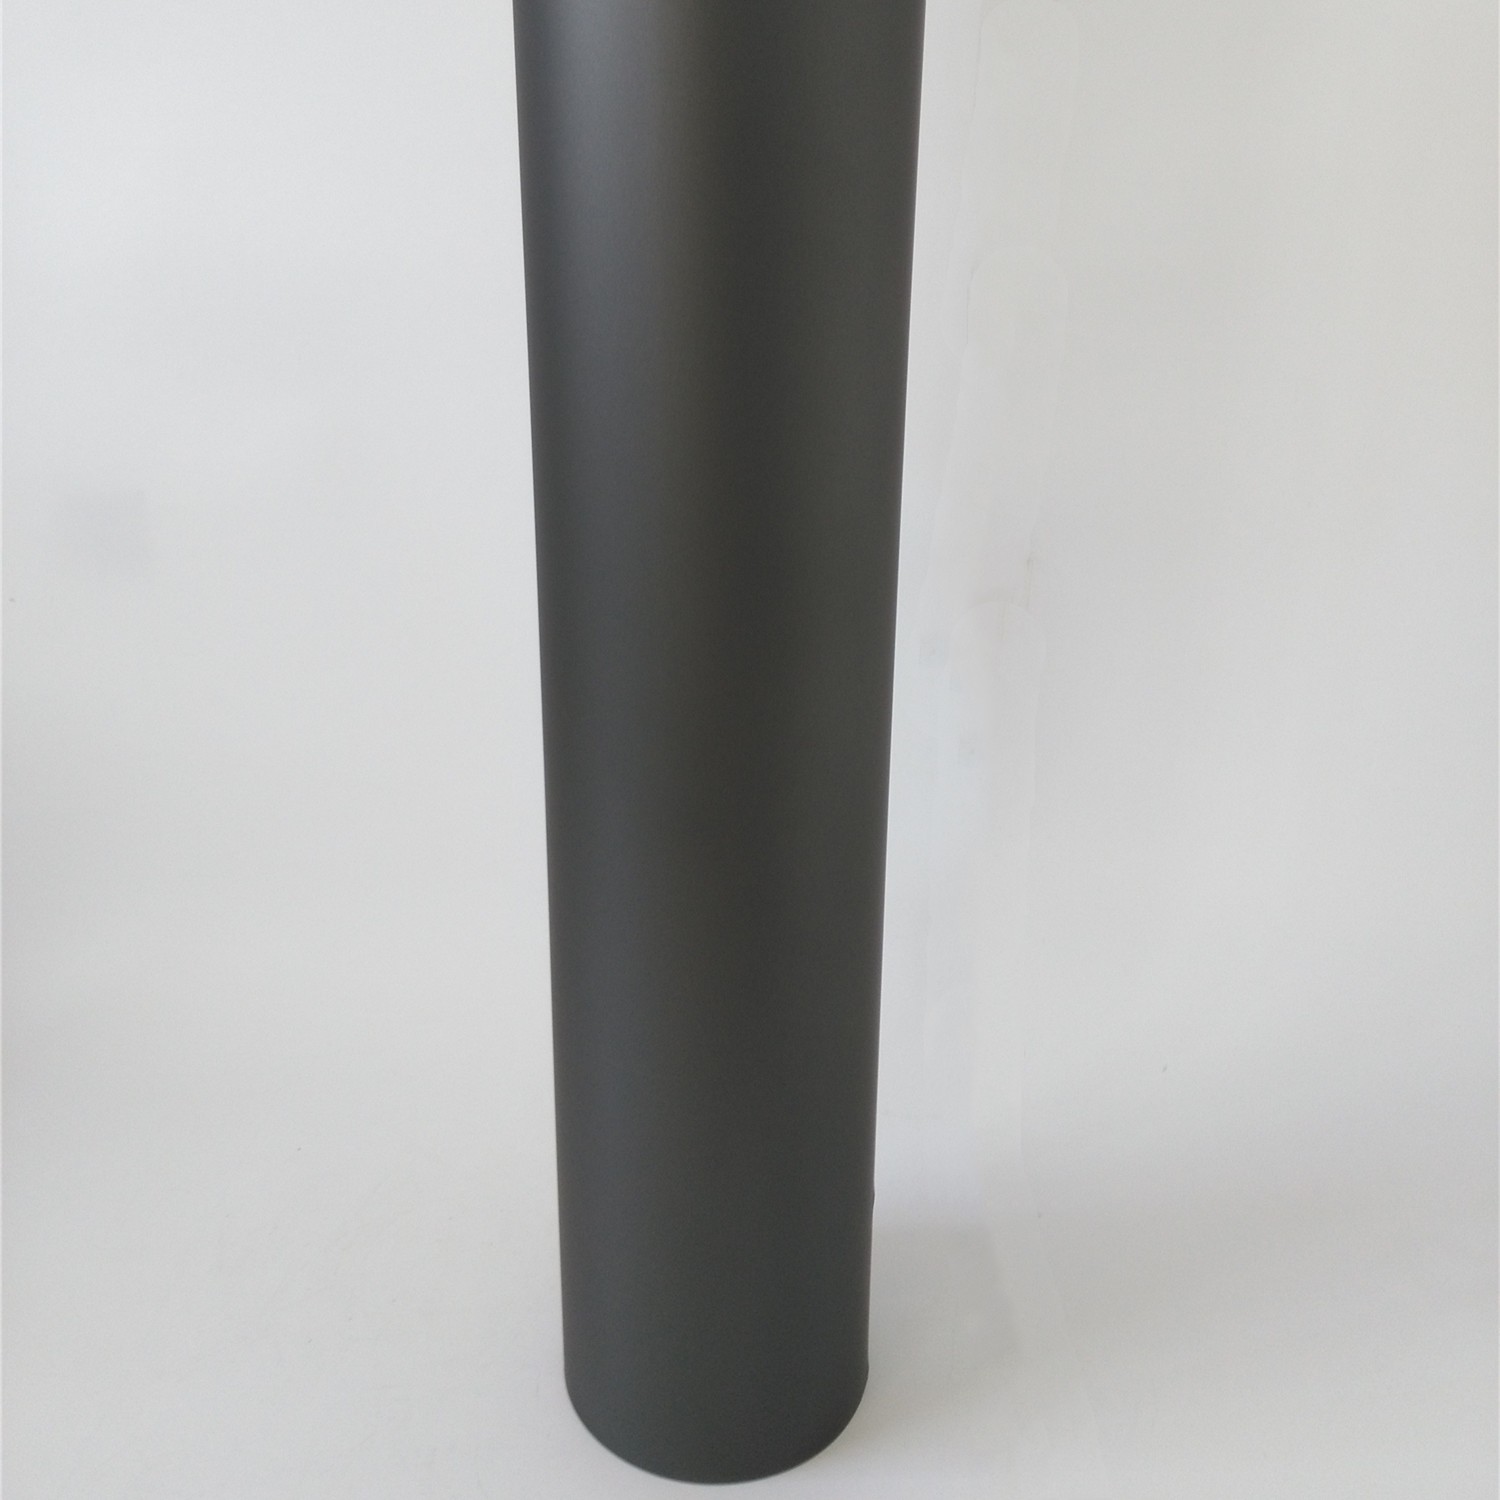 6 Inch Straight Single Wall Stainless Steel Flue Pipe Black Powder 6 Inch Stainless Steel Flue Pipe